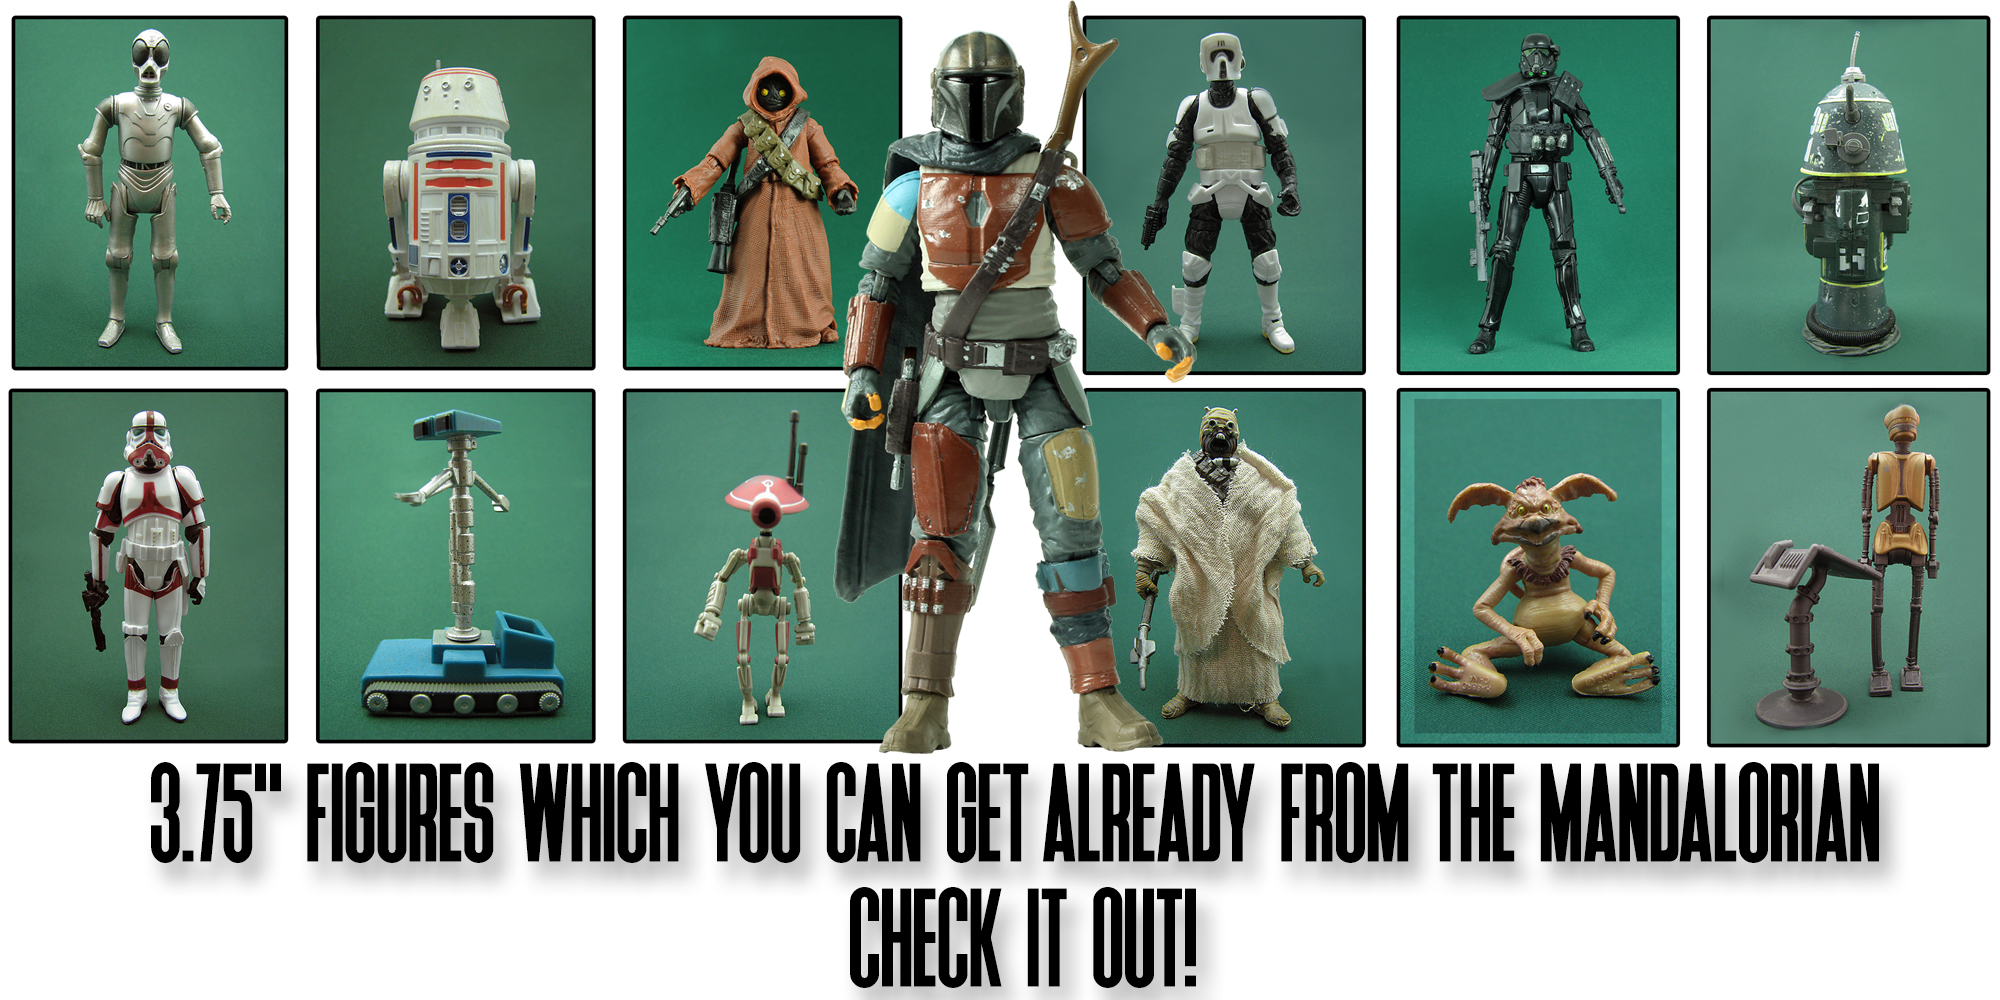 3.75" Figures Which You Can Get Already From The Mandalorian!